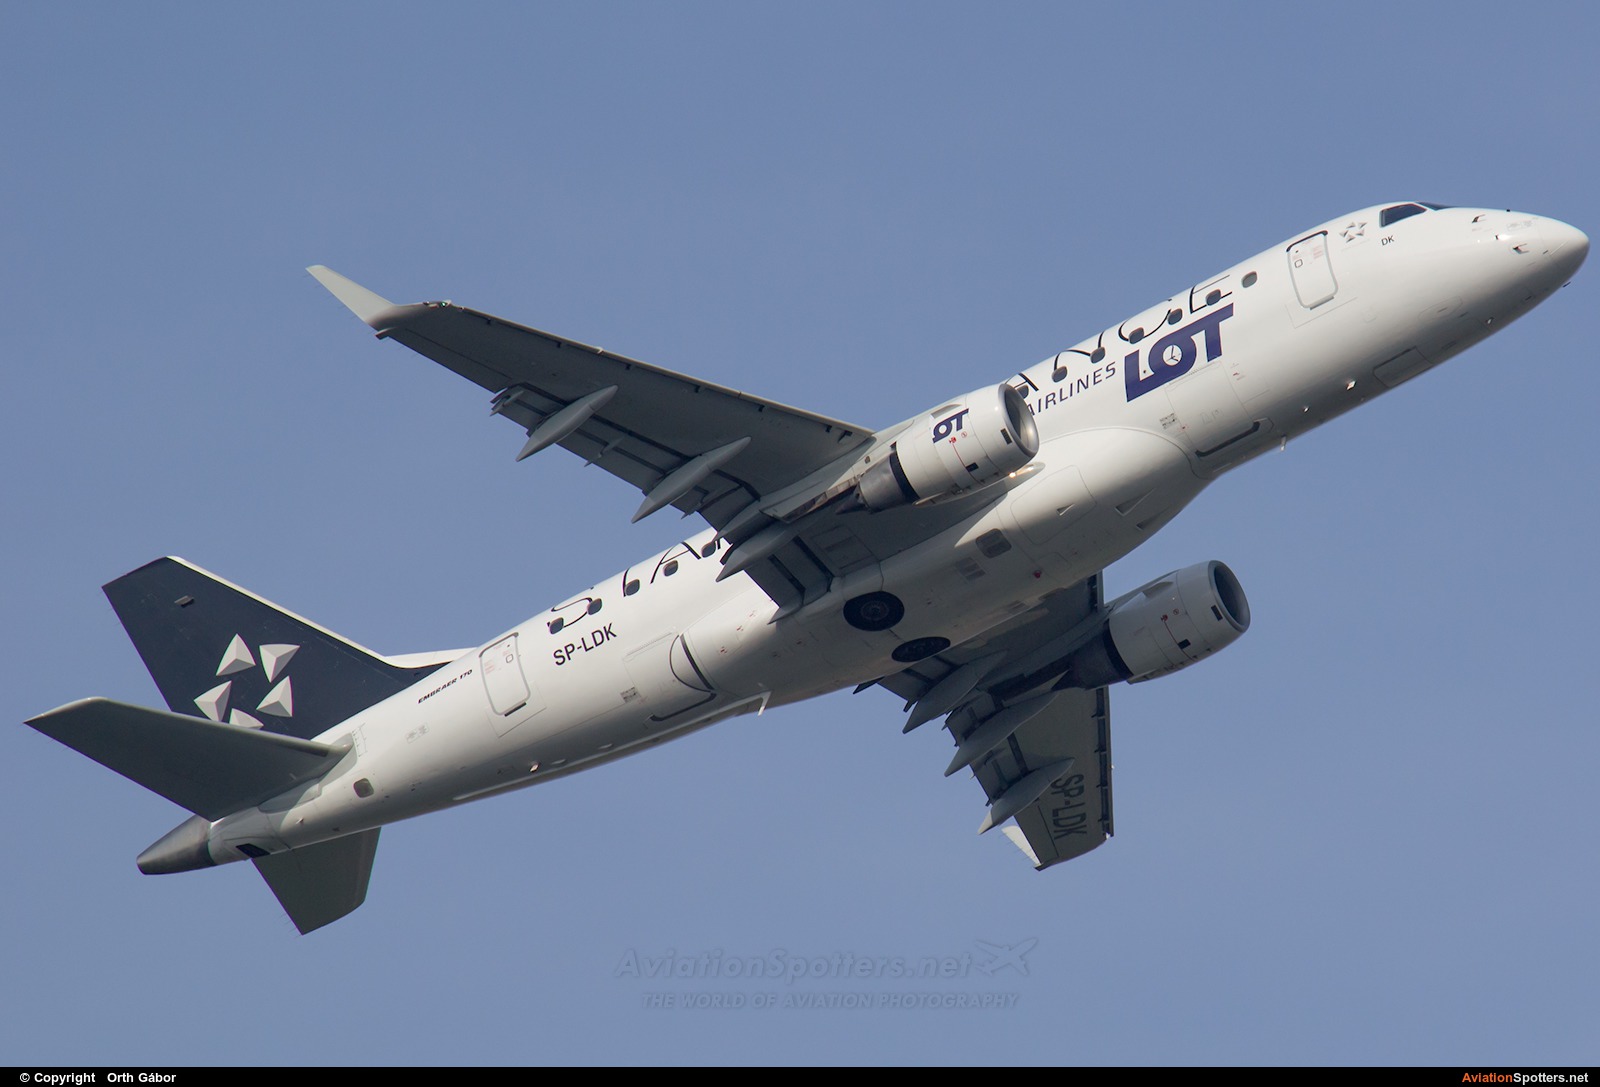 LOT - Polish Airlines  -  170  (SP-LDK) By Orth Gábor (Roodkop)